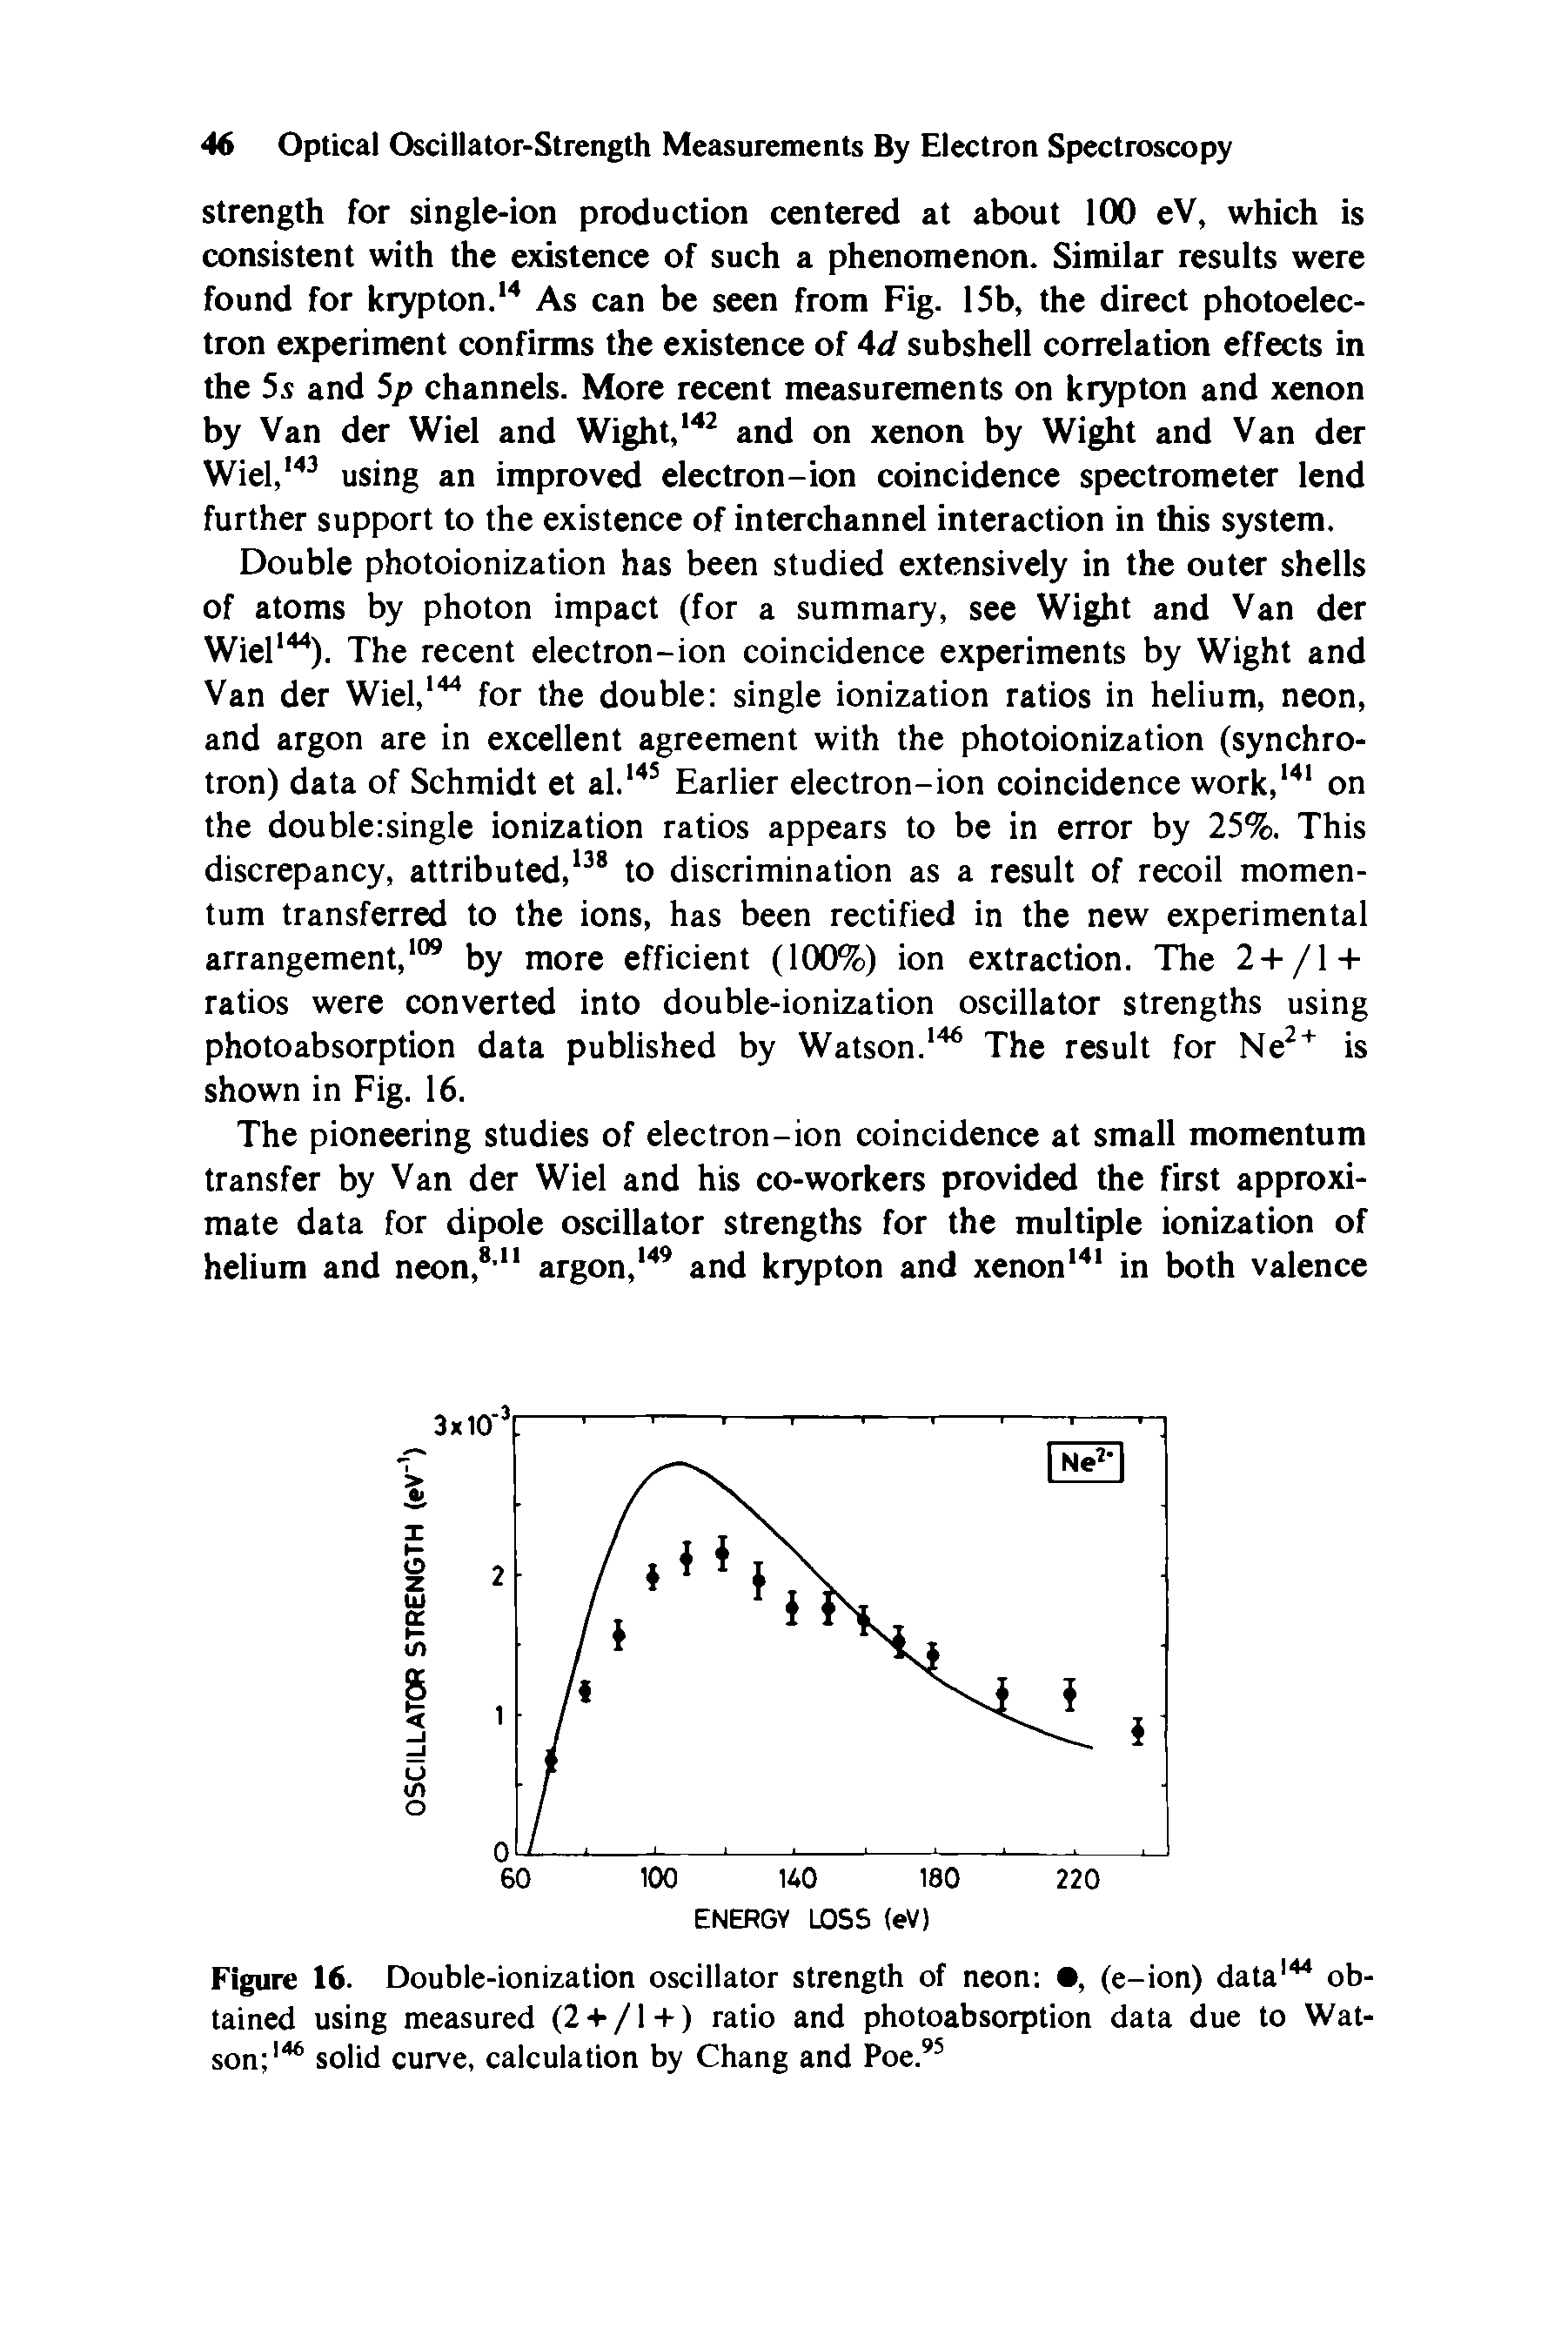 Figure 16. Double-ionization oscillator strength of neon , (e-ion) data144 obtained using measured (2 + /1+) ratio and photoabsorption data due to Watson 146 solid curve, calculation by Chang and Poe.95...